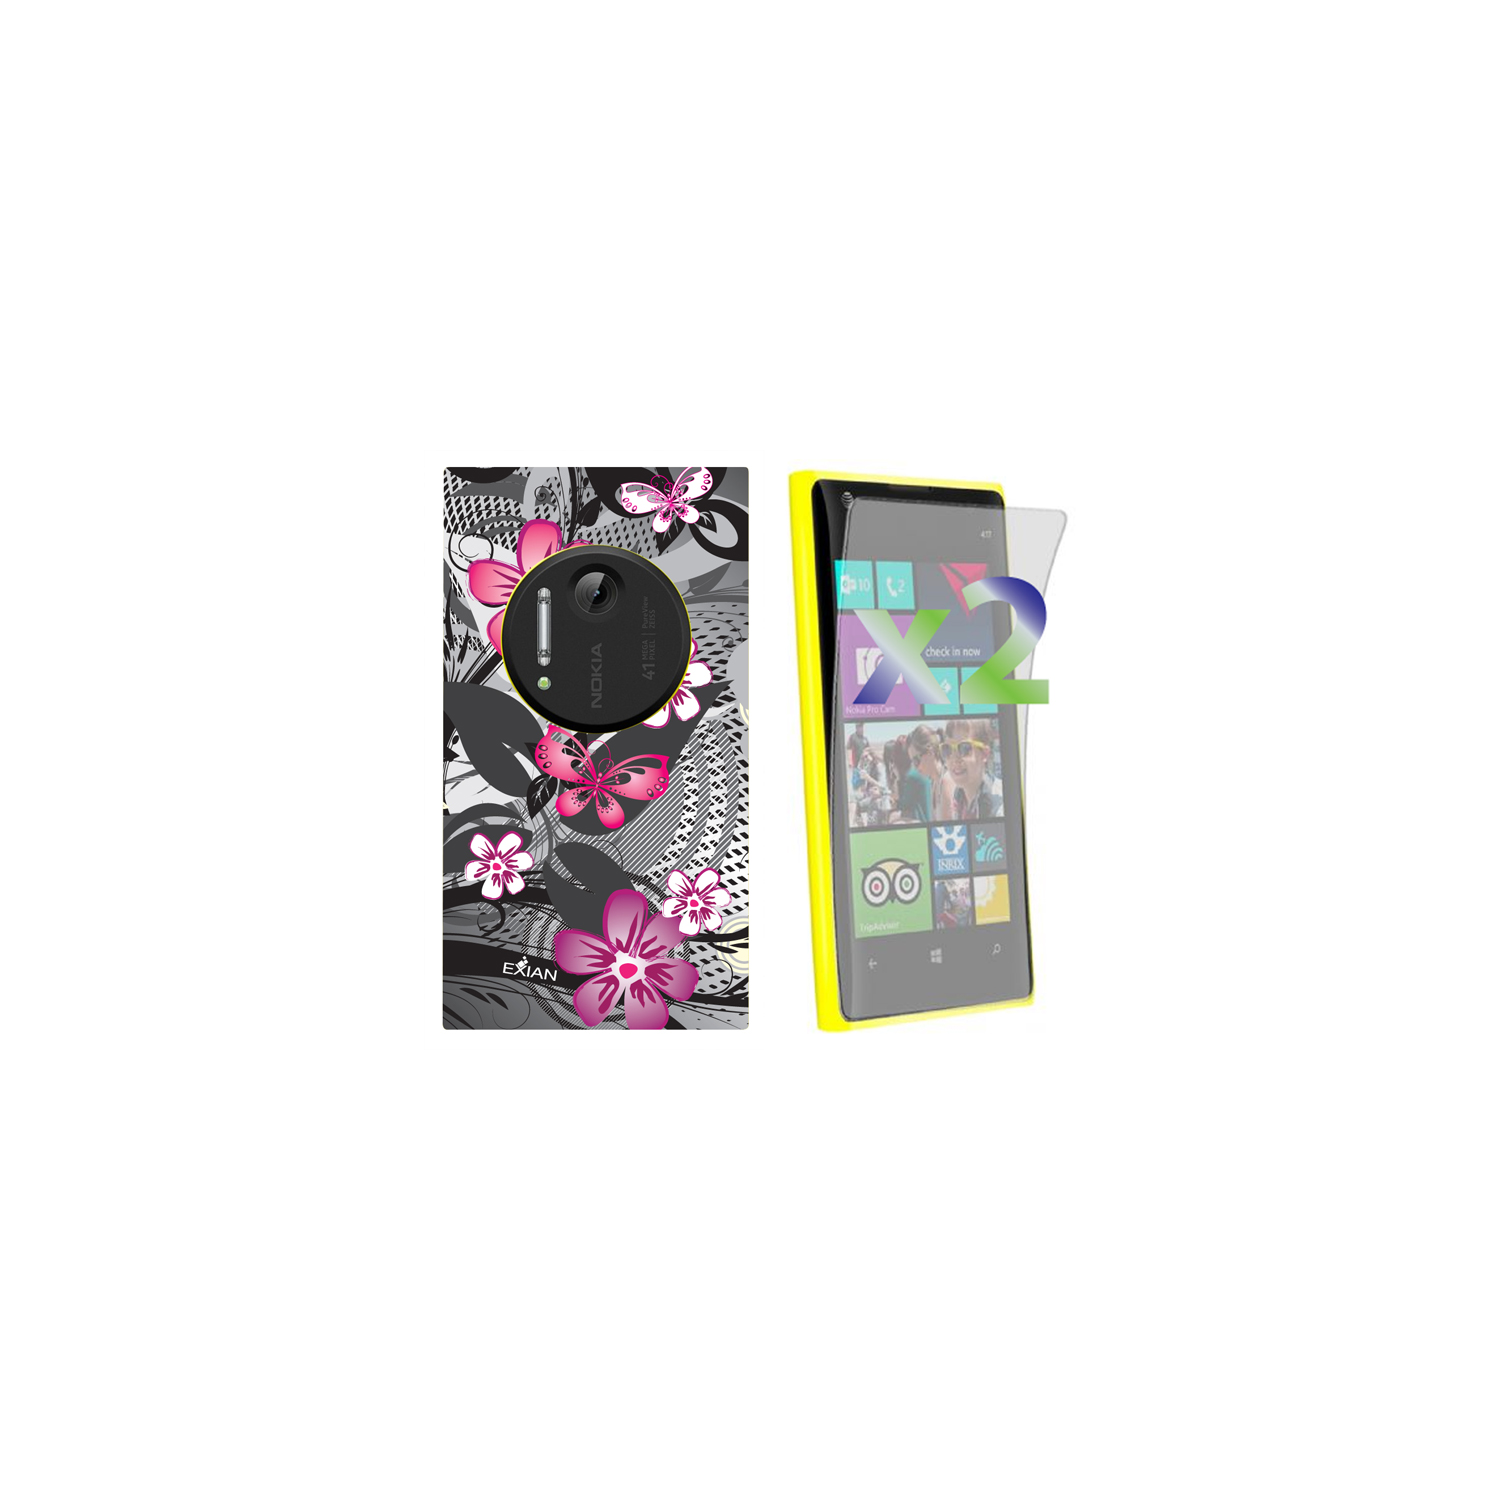 Exian Fitted Soft Shell Case for Nokia Lumia 1020 - Pink/Black